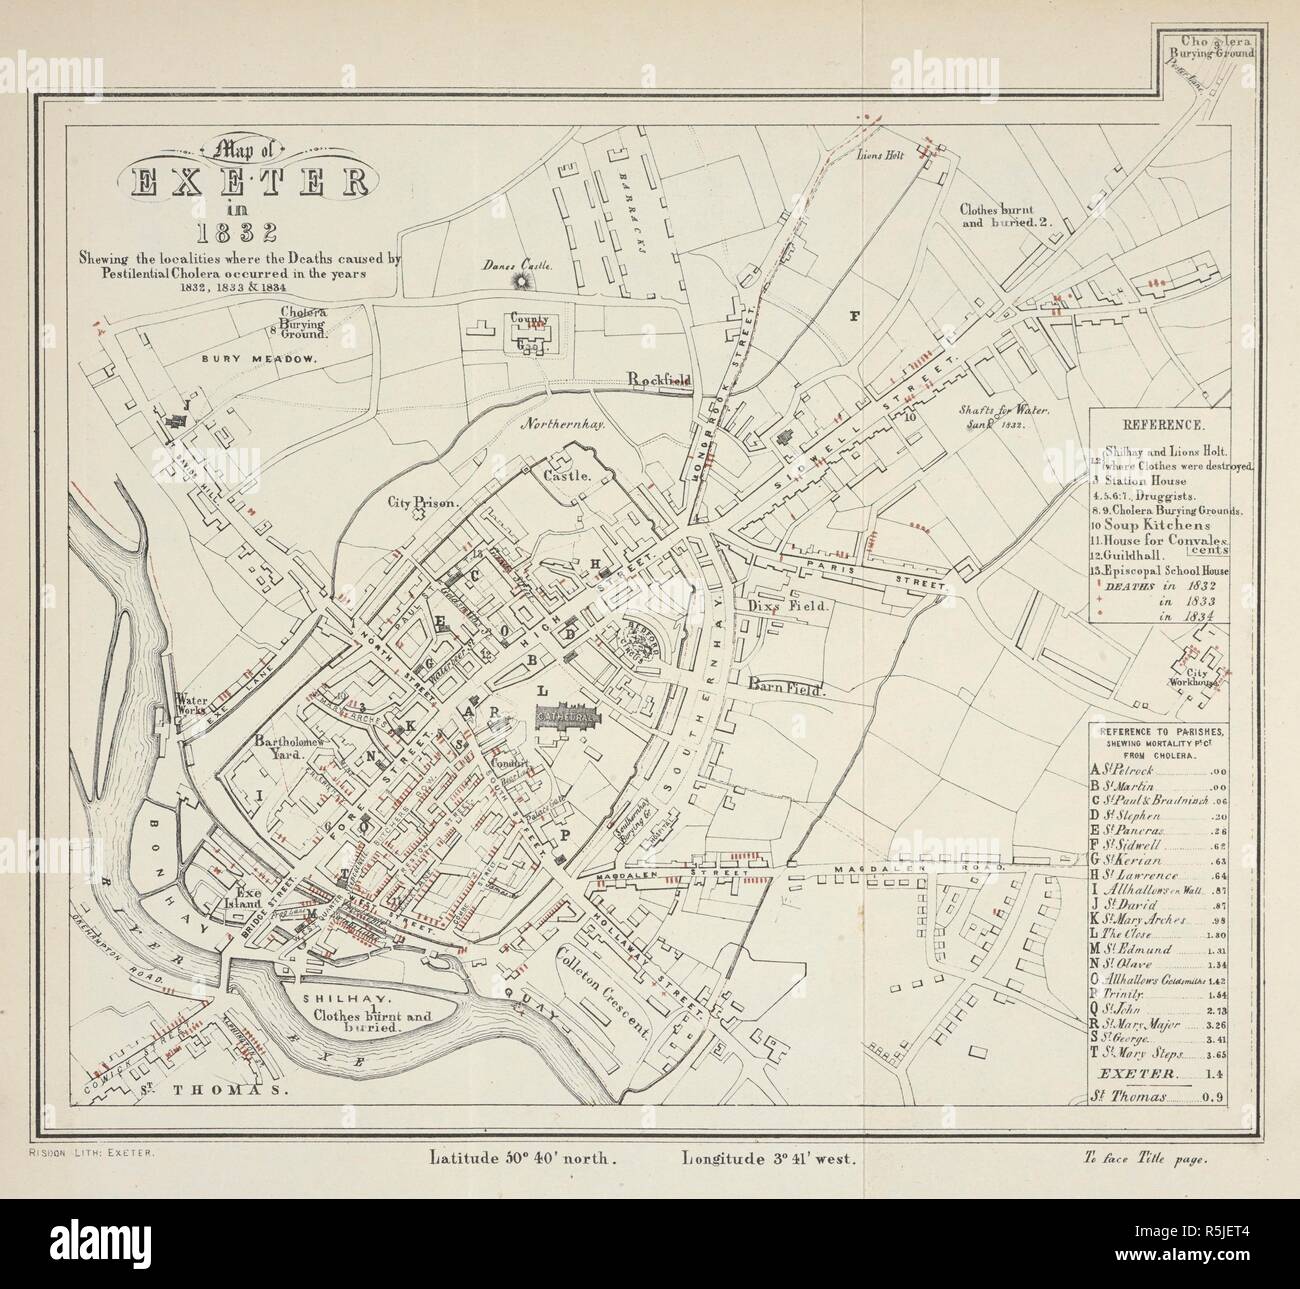 The map of Exeter in 1832, shewing the localalities where the deaths caused by perstilential cholera occurred in the yeras 1832, 1833 & 1834. The History of the Cholera in Exeter in 1832. London : J. Churchill, 1849. Source: 7650.d.59 map. Author: Shapter, Thomas. Stock Photo